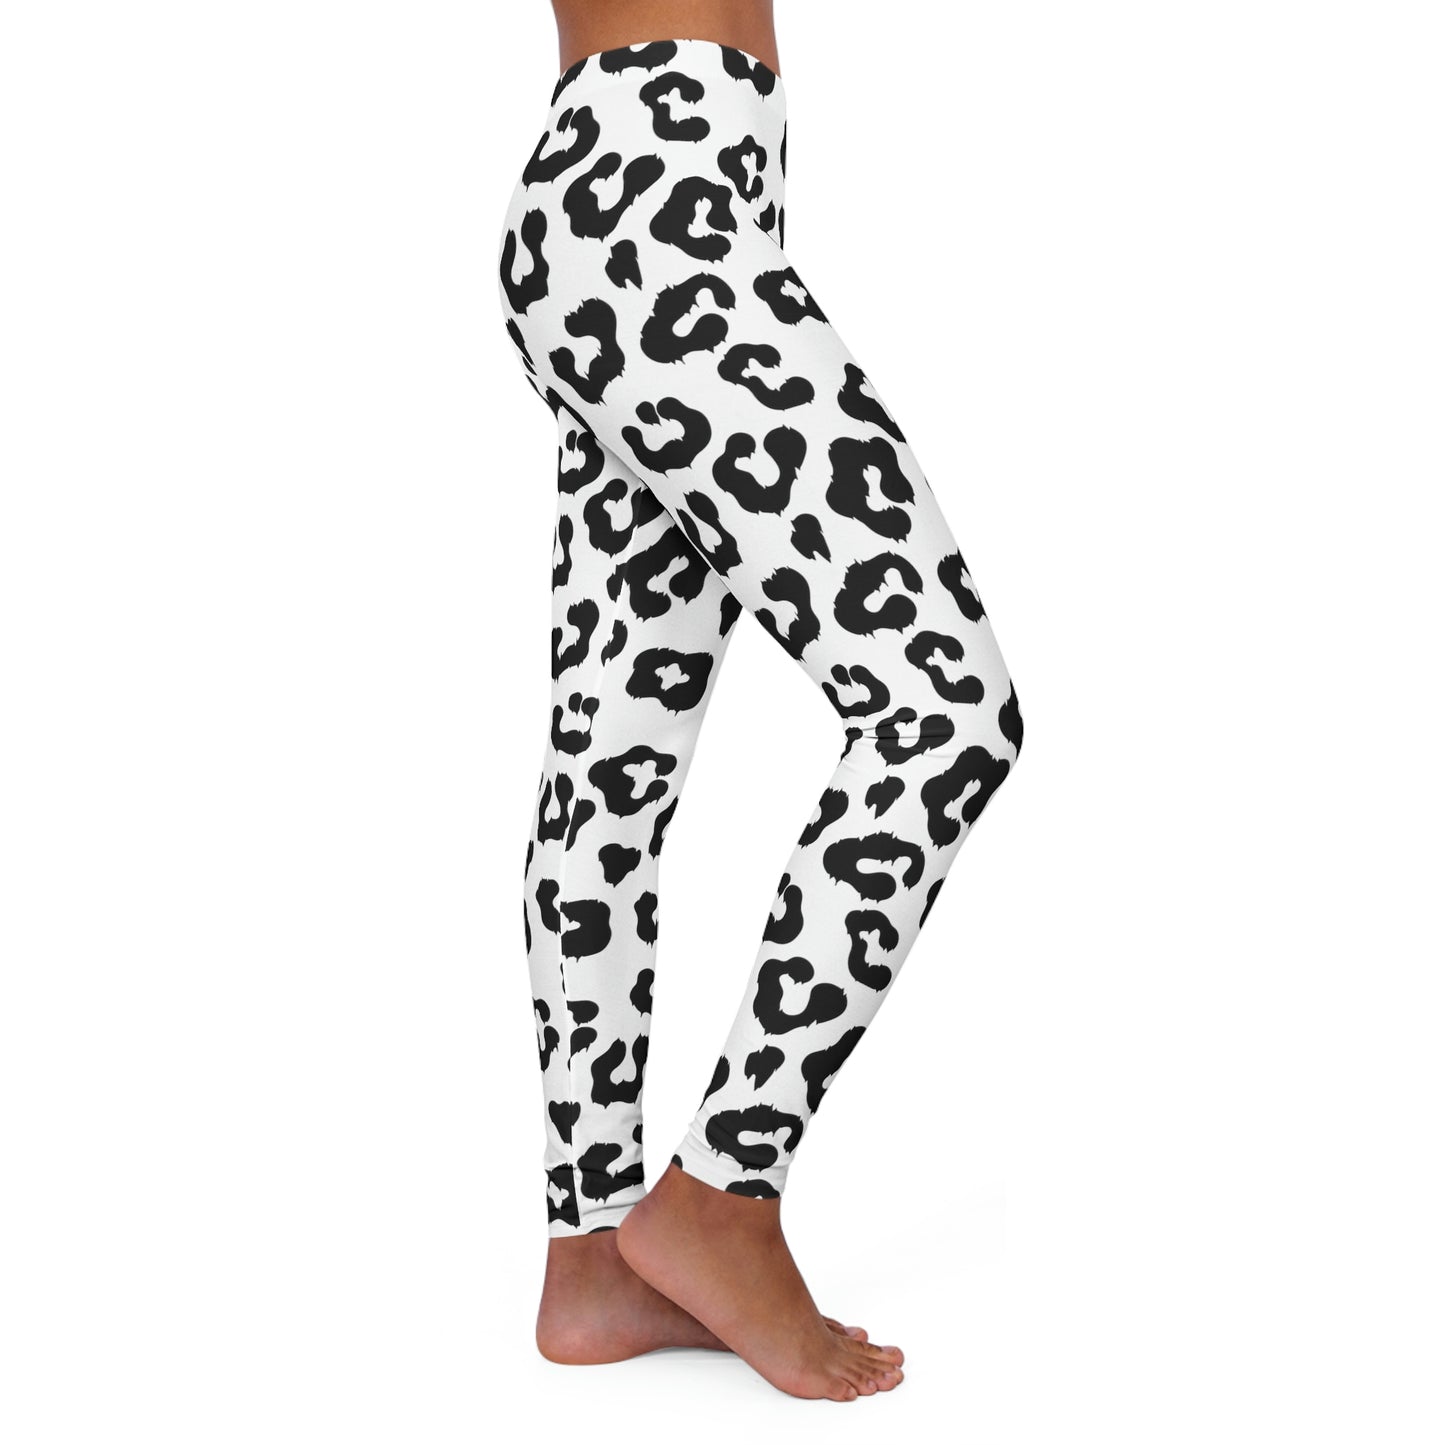 Dog Mom Women Leggings One of a Kind Gift - Unique Workout Activewear tights for Wife, Best Friend . Mothers Day or Christmas Gift